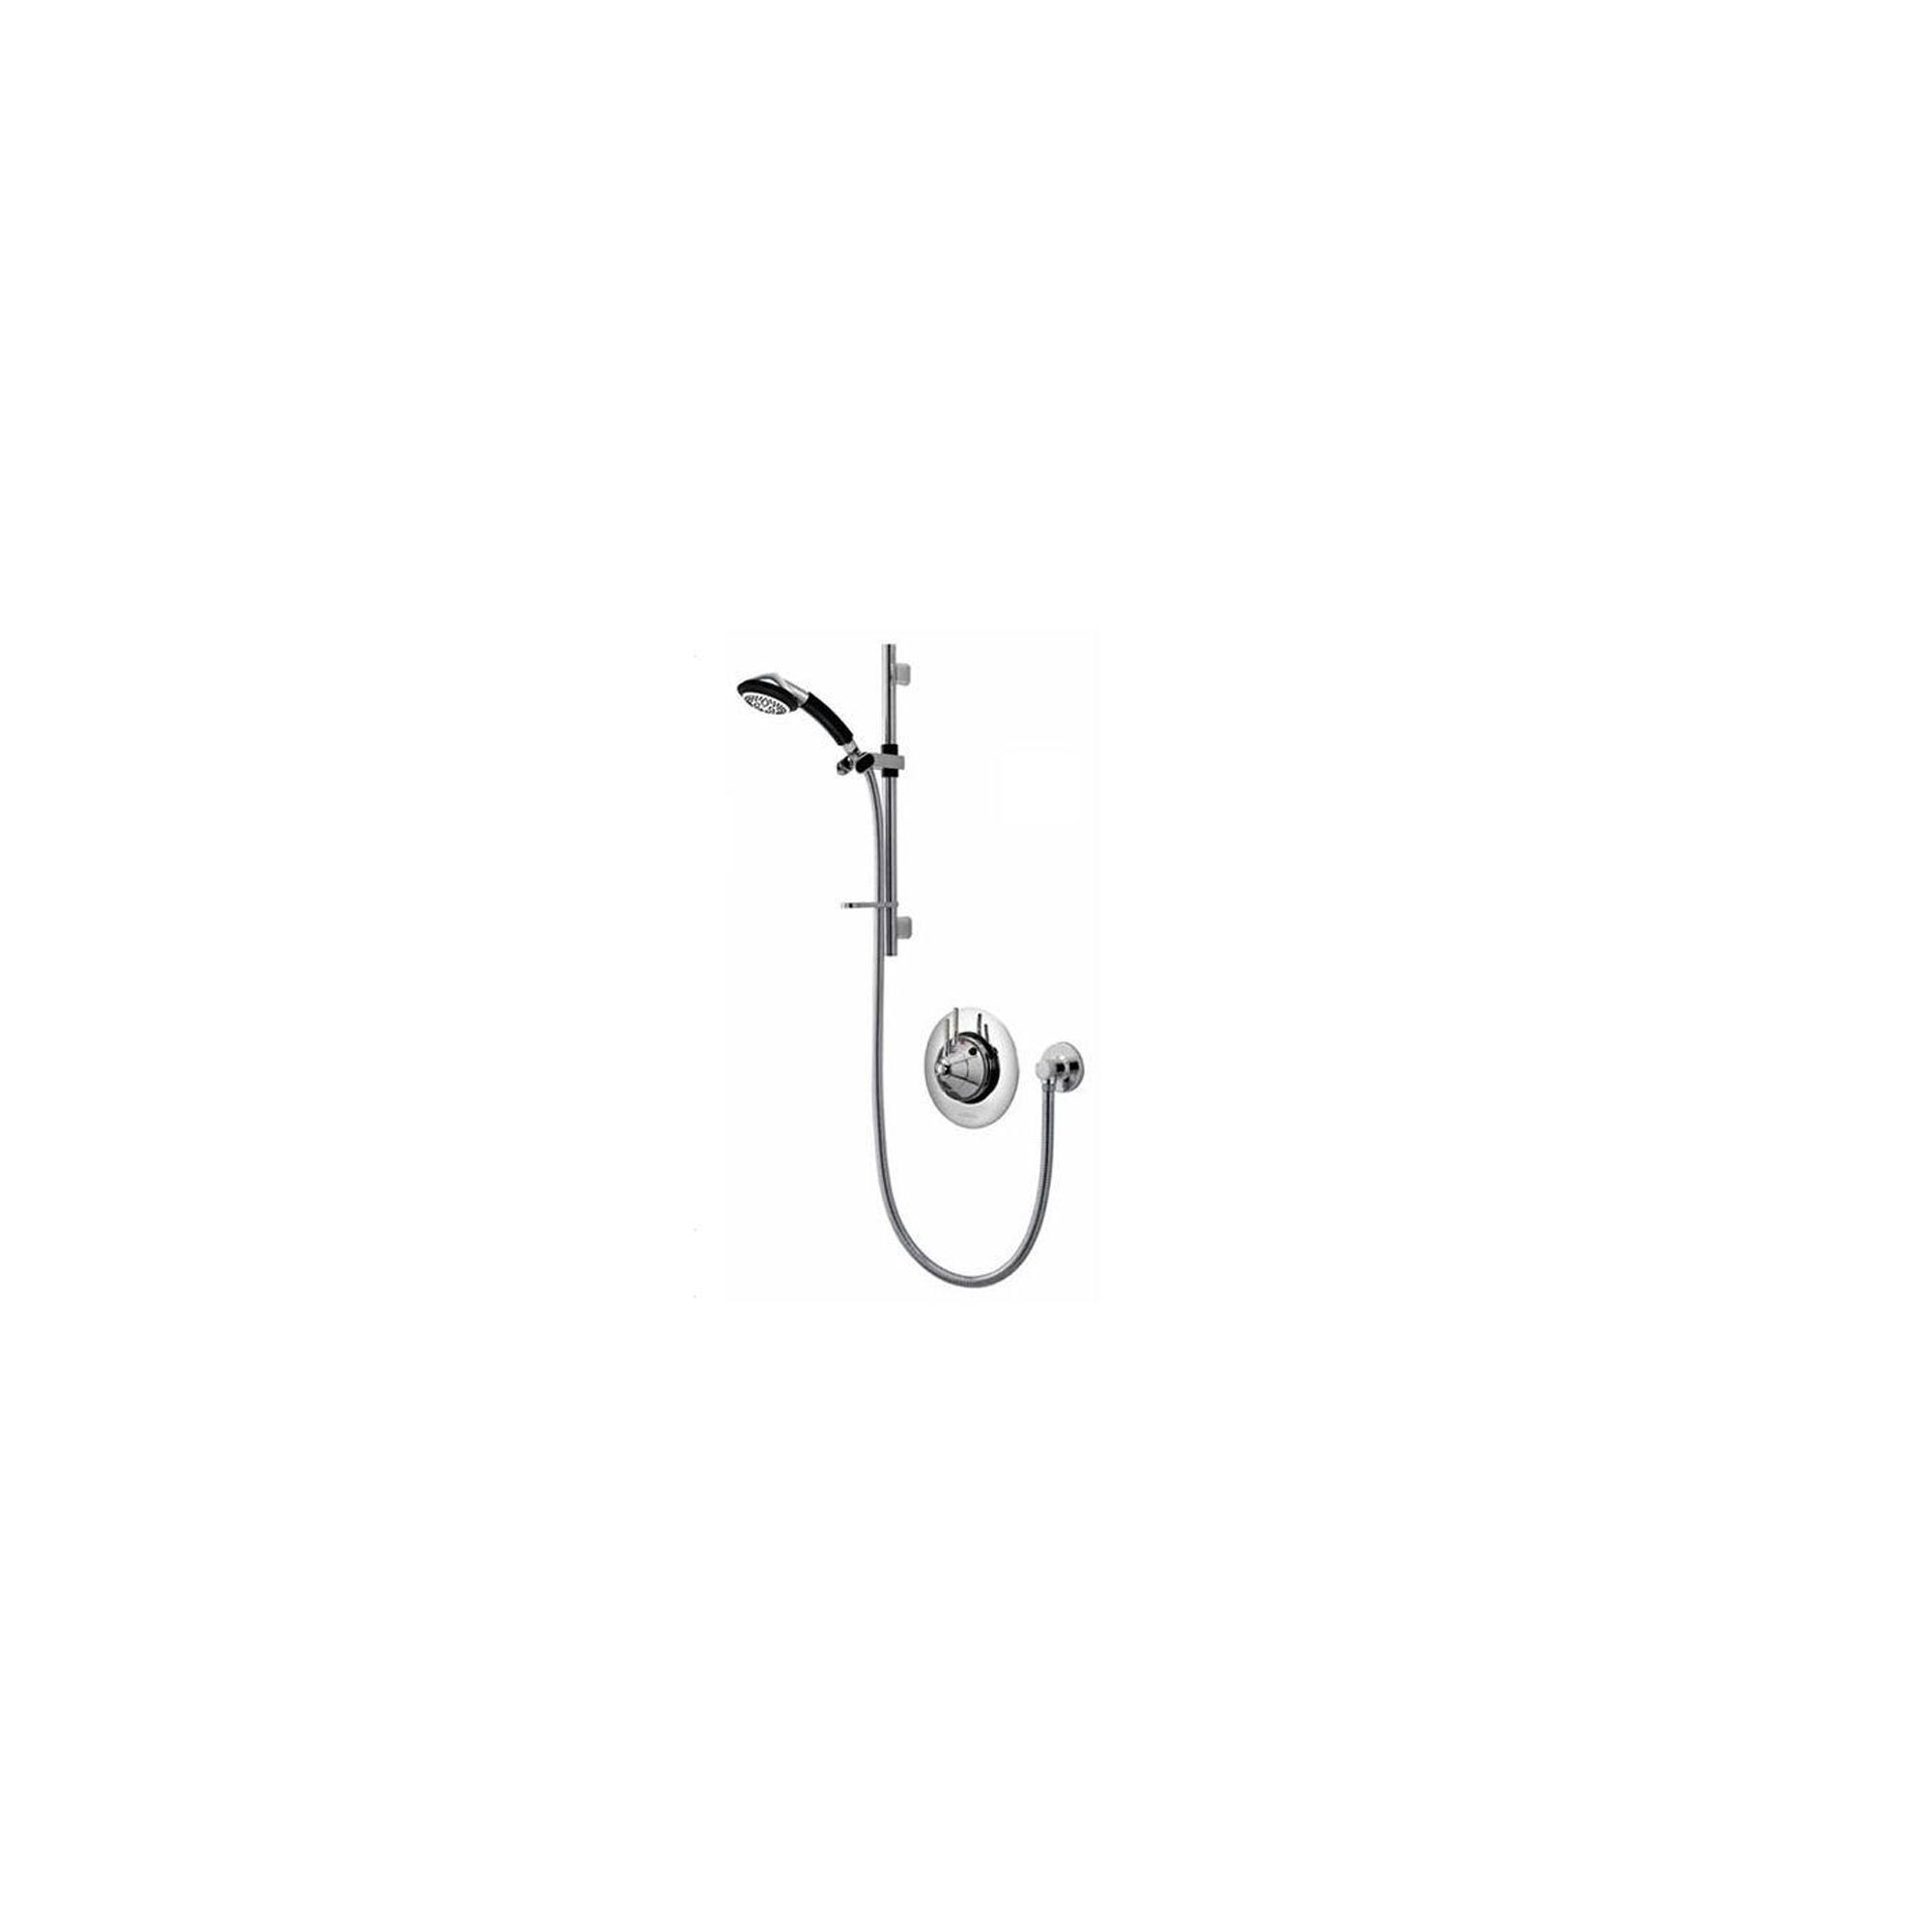 Aqualisa Axis Thermo Concealed Mixer Valve with Adjustable Head Kit at Tescos Direct